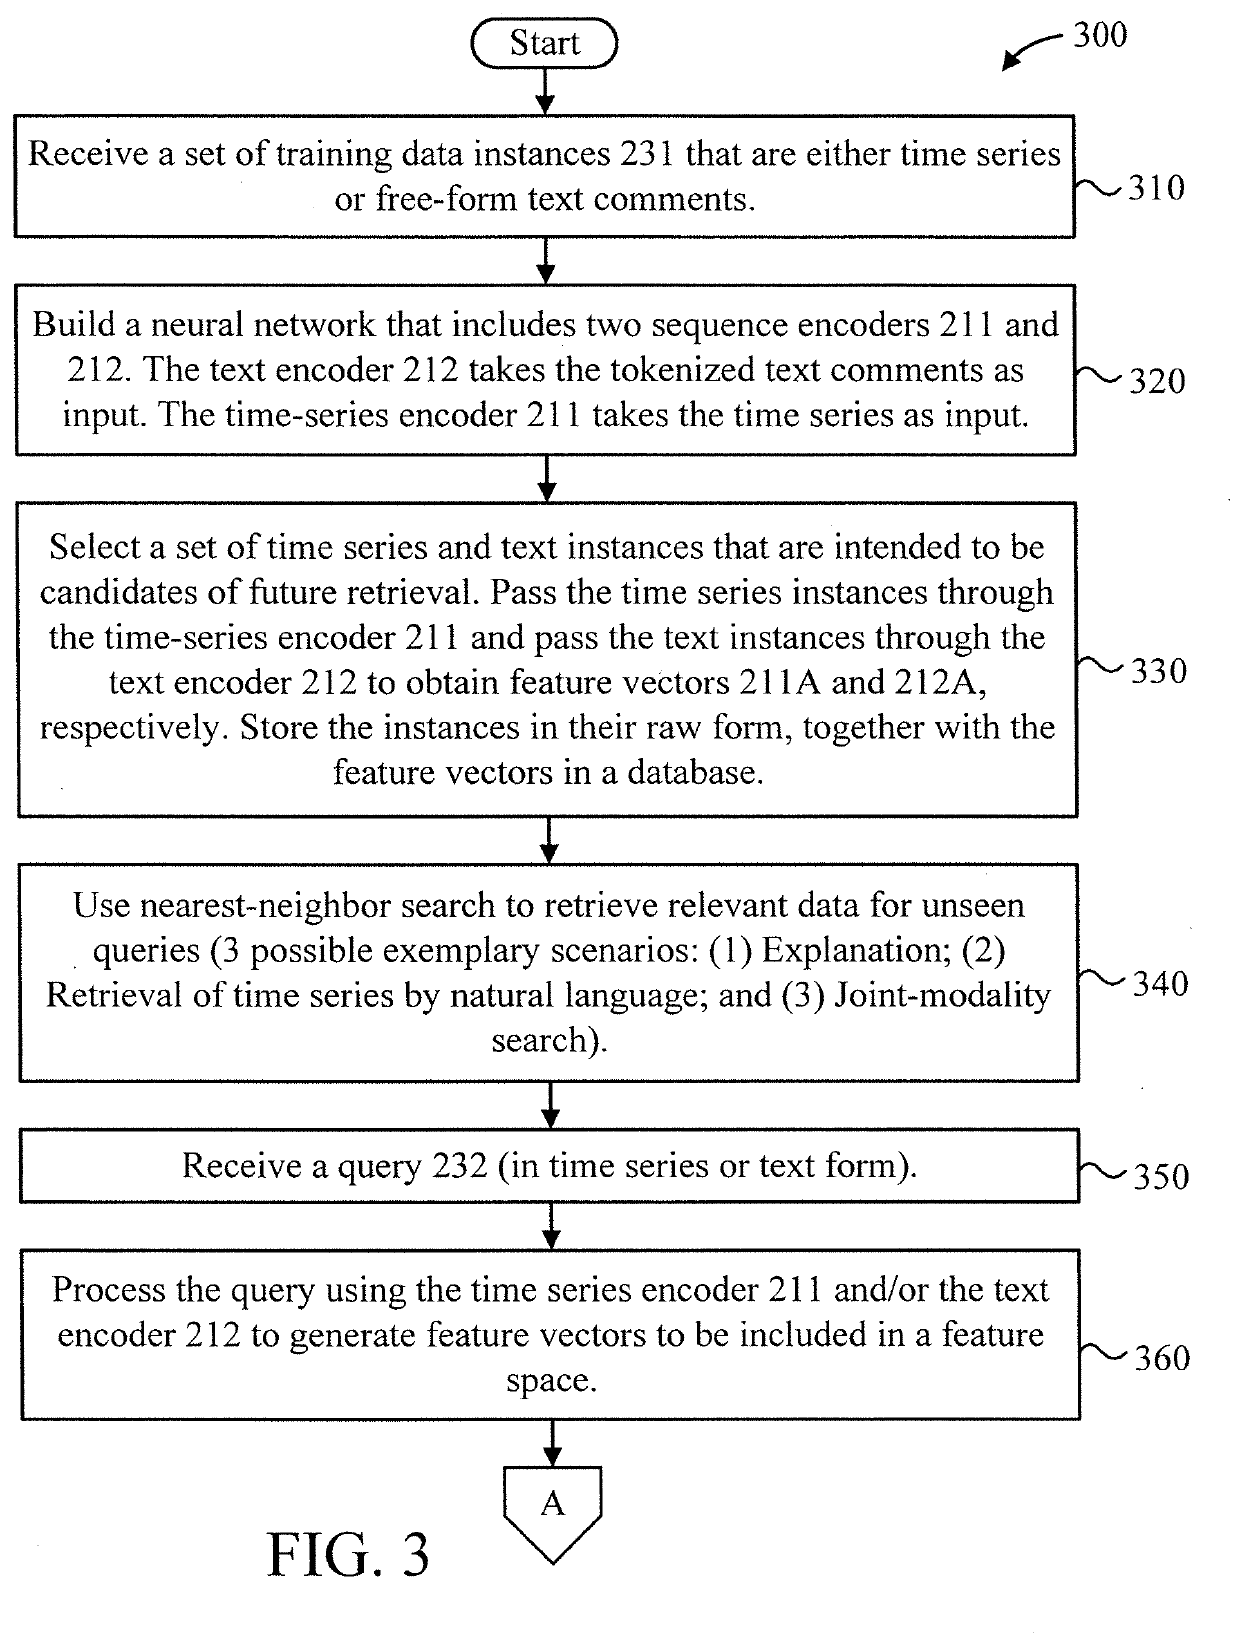 Supervised cross-modal retrieval for time-series and text using multimodal triplet loss